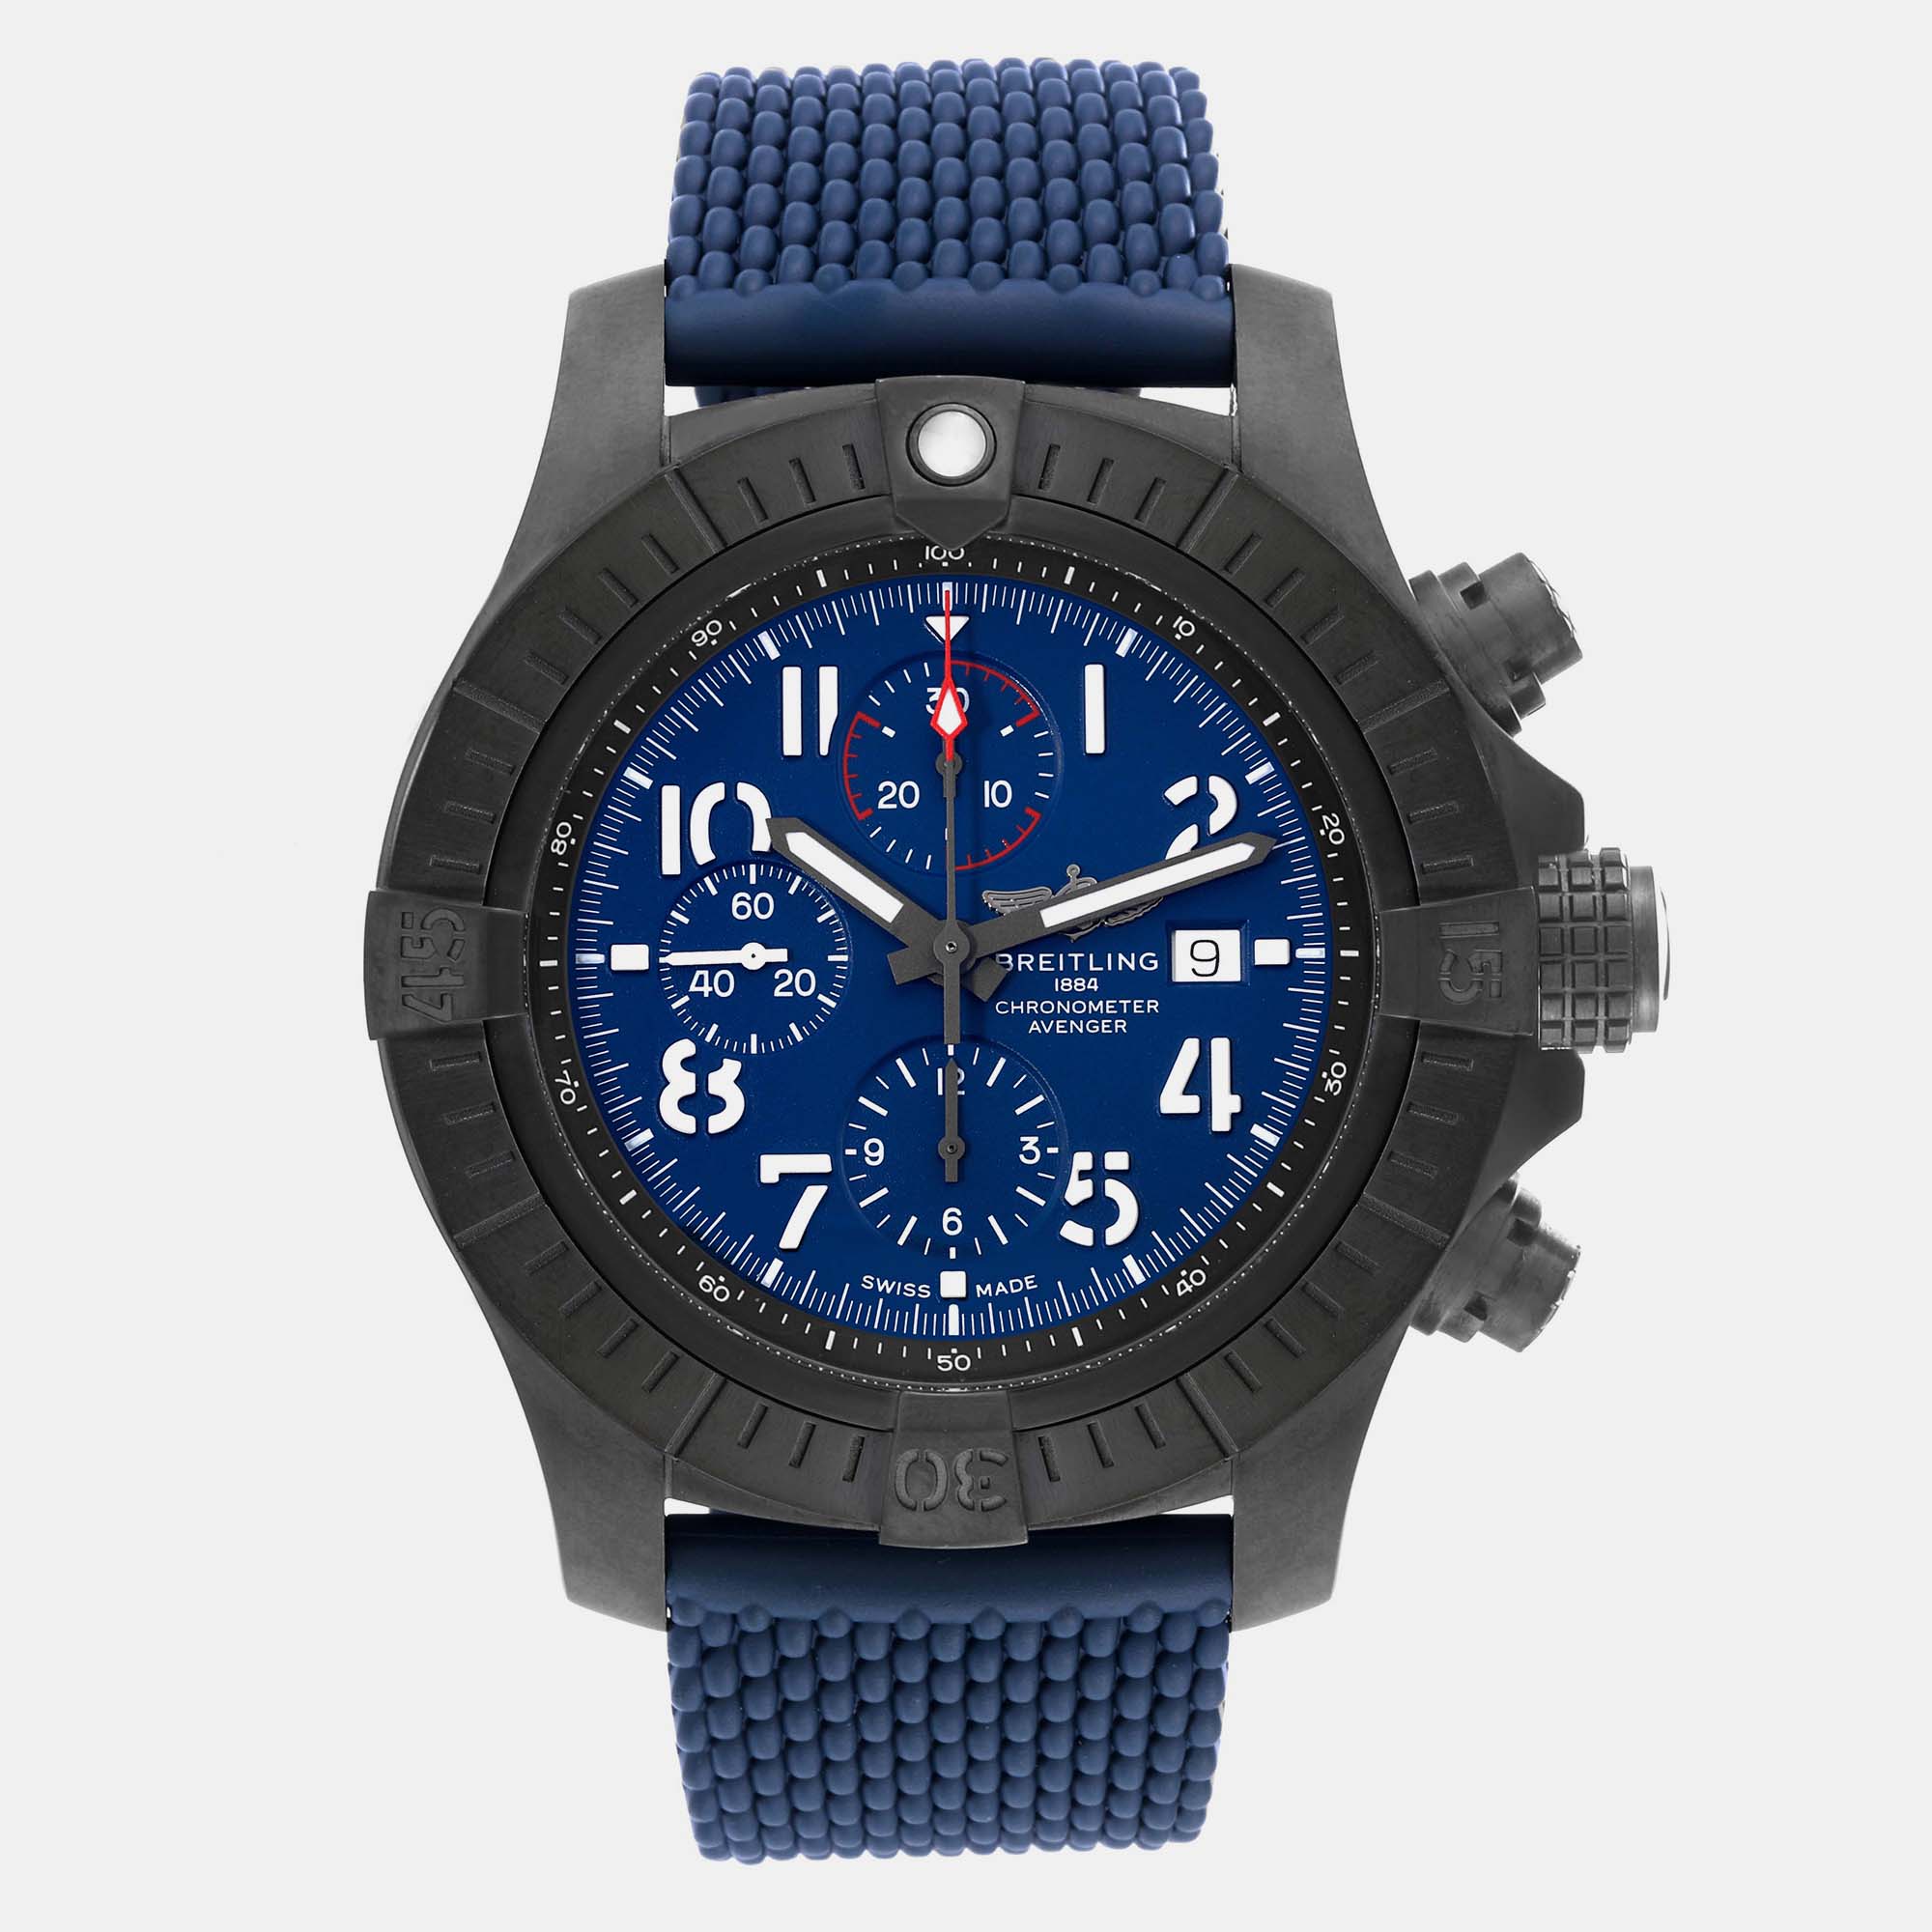 This Breitling luxury watch is characterized by skillful craftsmanship and understated charm. Meticulously constructed to tell time in an elegant way it comes in a sturdy case and flaunts a seamless blend of innovative design and flawless style.